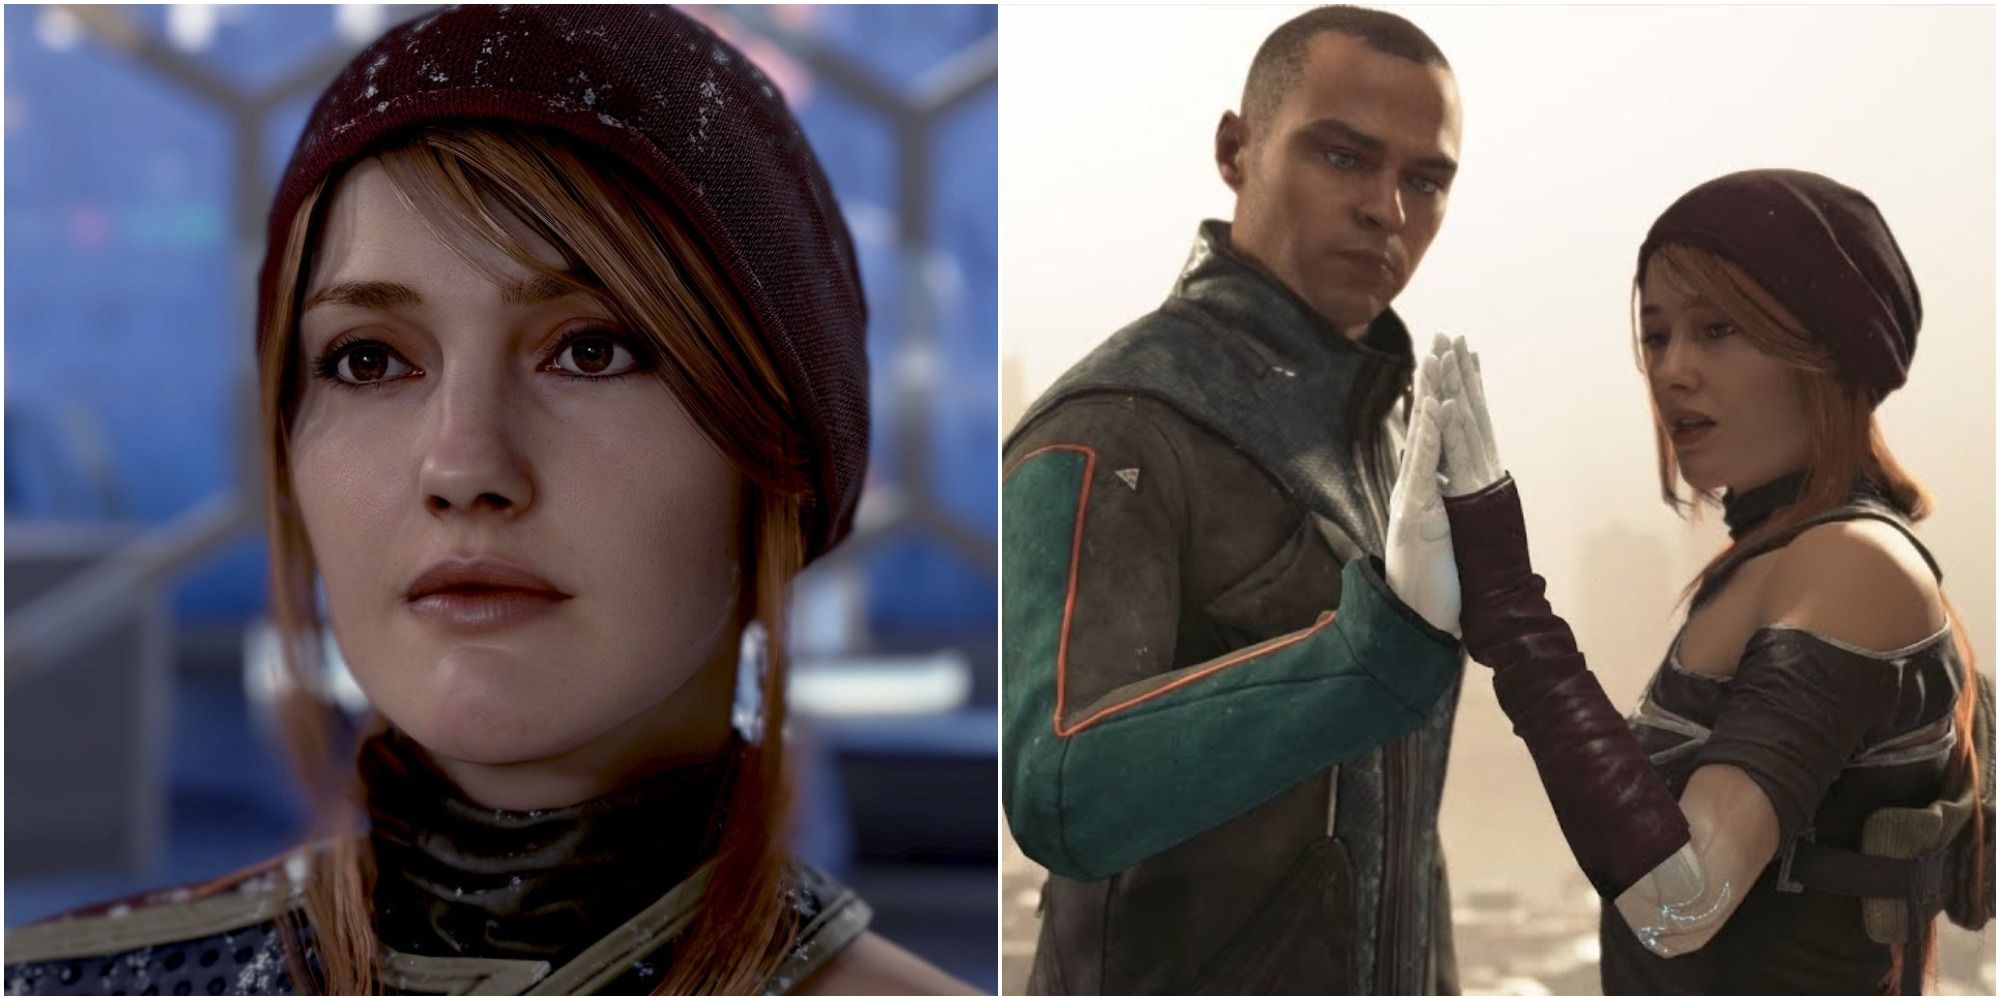 Detroit: Become Human Romance - How to Romance North as Markus